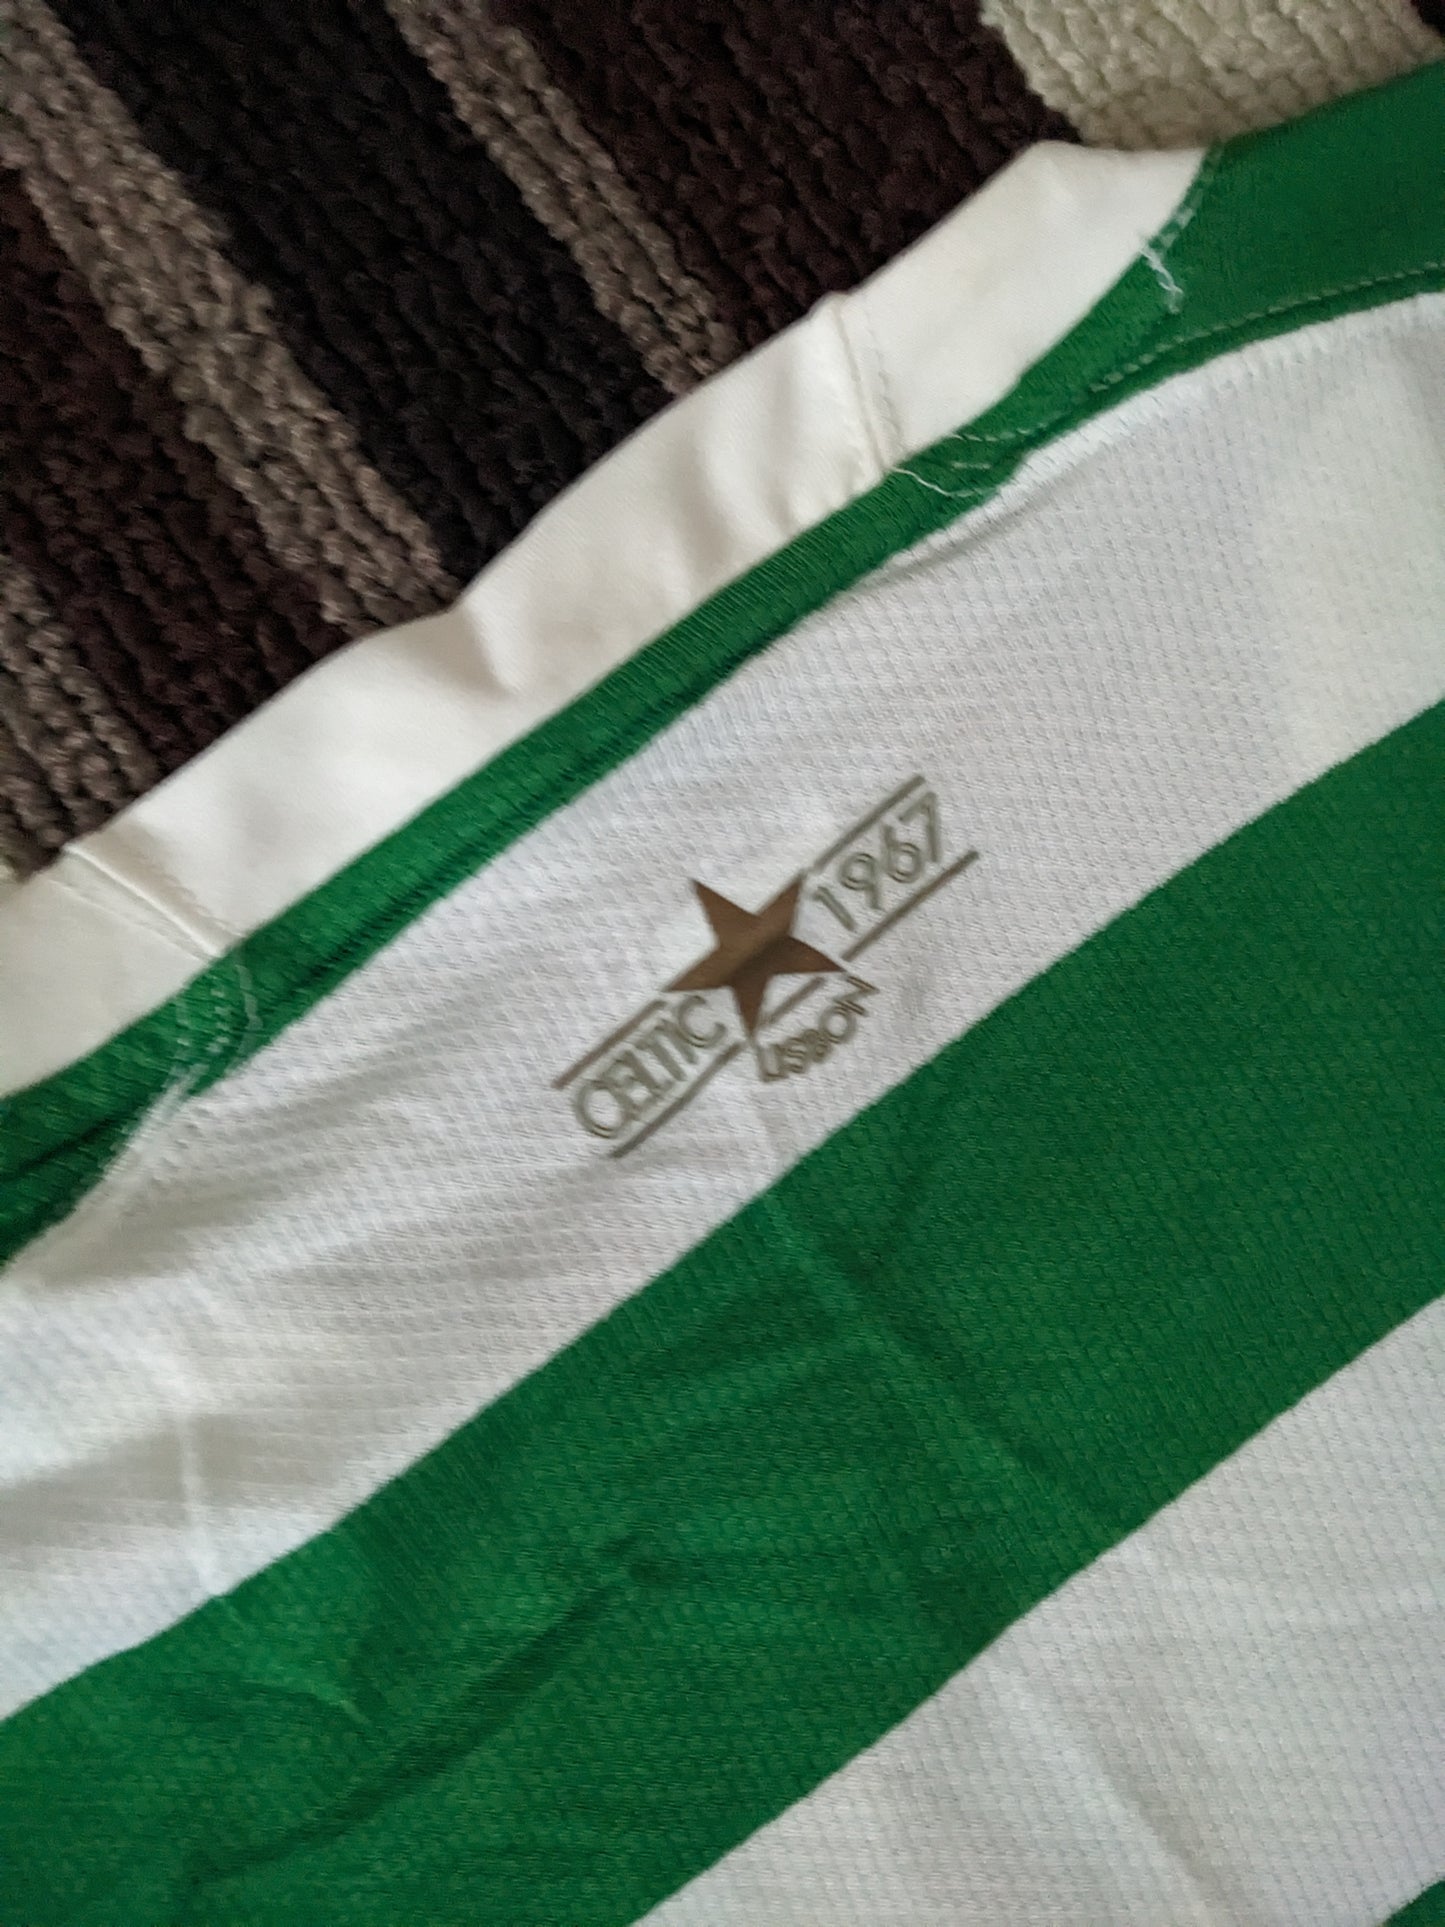 Celtic Scotland home (YOUTH S) *BRAND NEW WITH TAGS